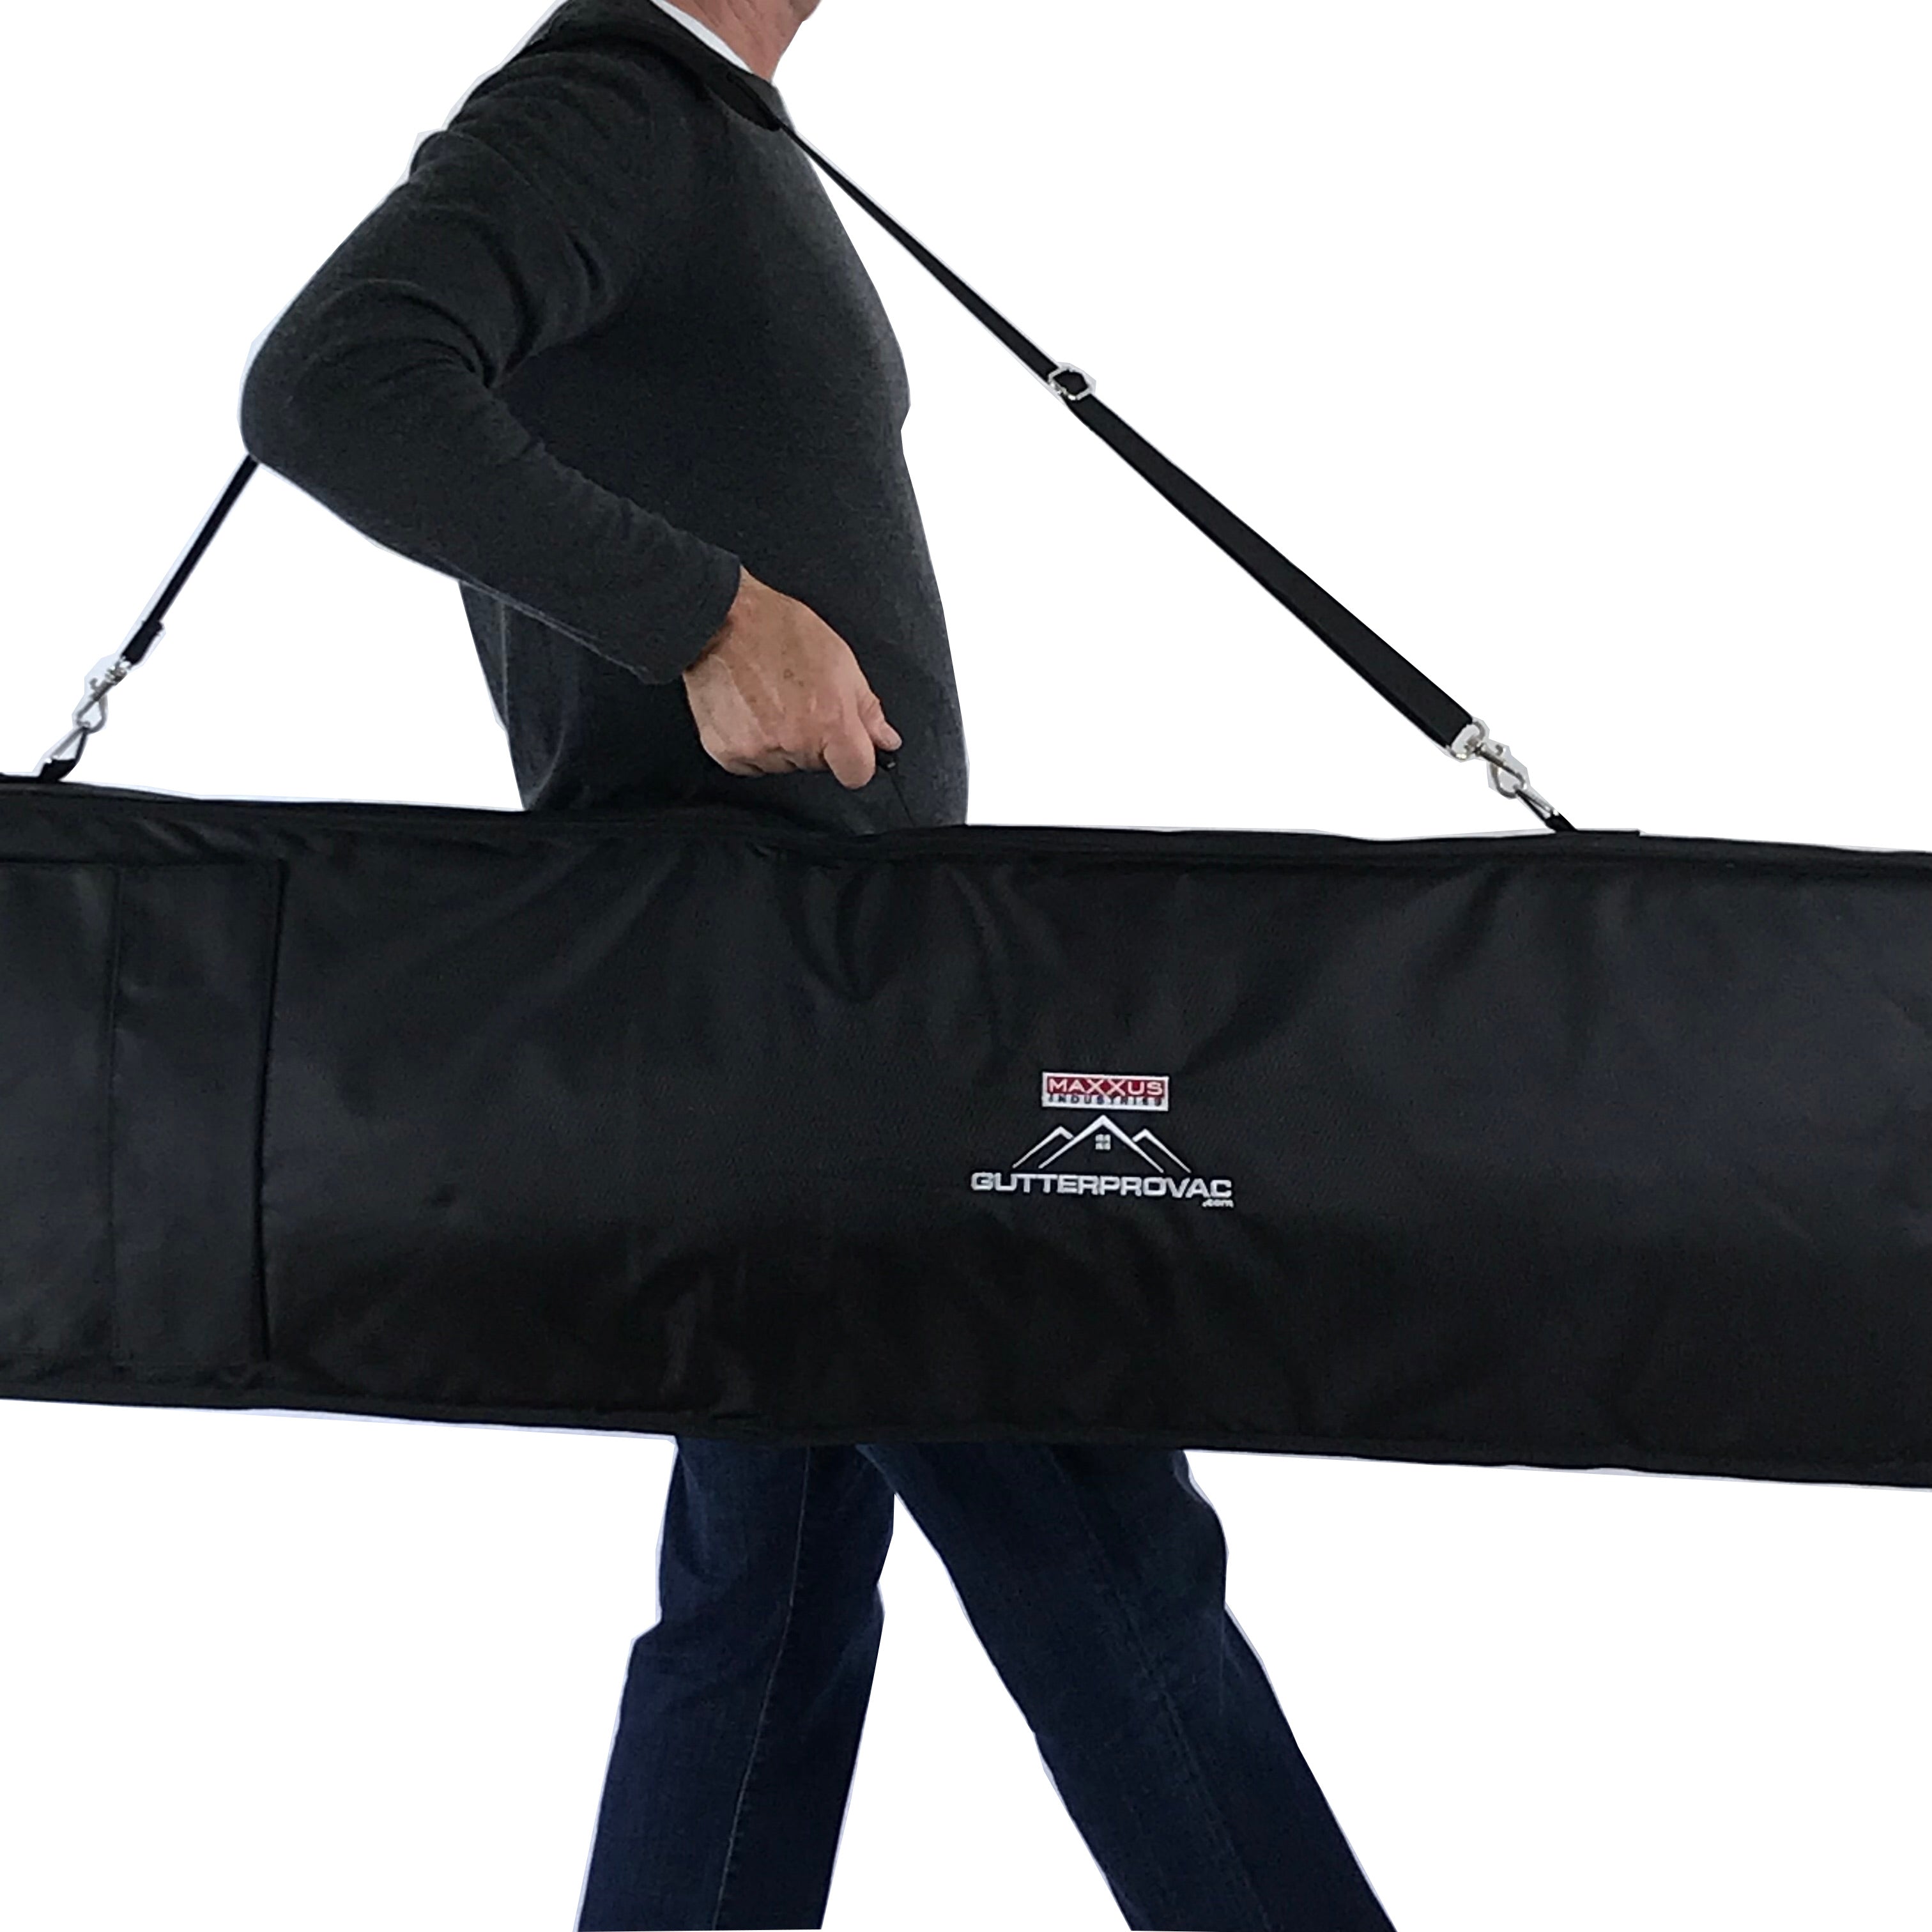 Carry Bag for Gutter Poles and Accessories